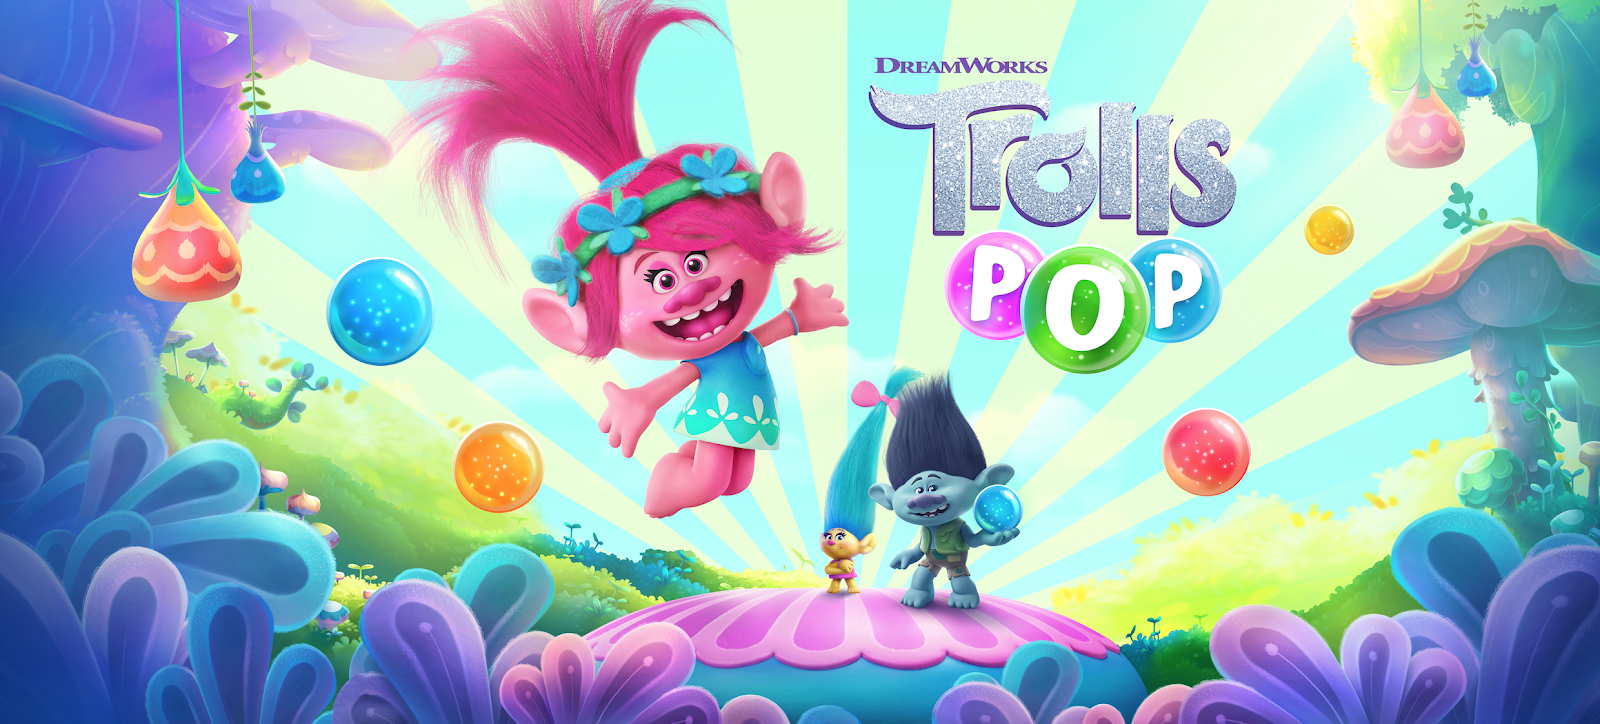 DreamWorks Trolls Pop - All New Bubble Shooter Mobile Game - AVAILABLE NOW! 